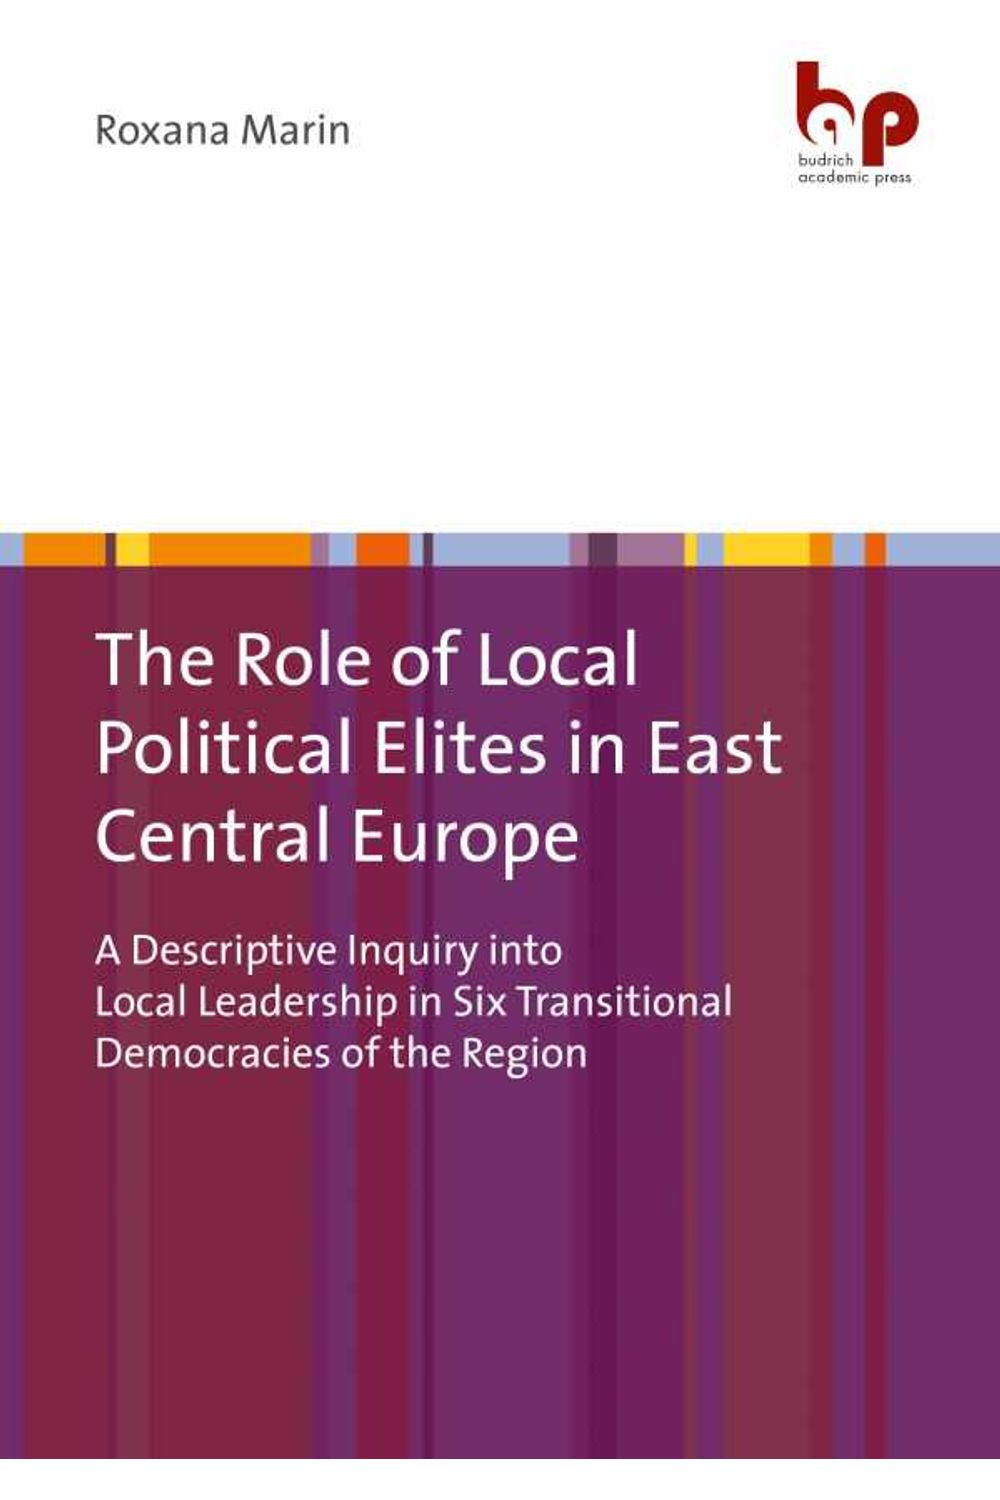 bw-the-role-of-local-political-elites-in-east-central-europe-budrich-academic-press-9783966659734